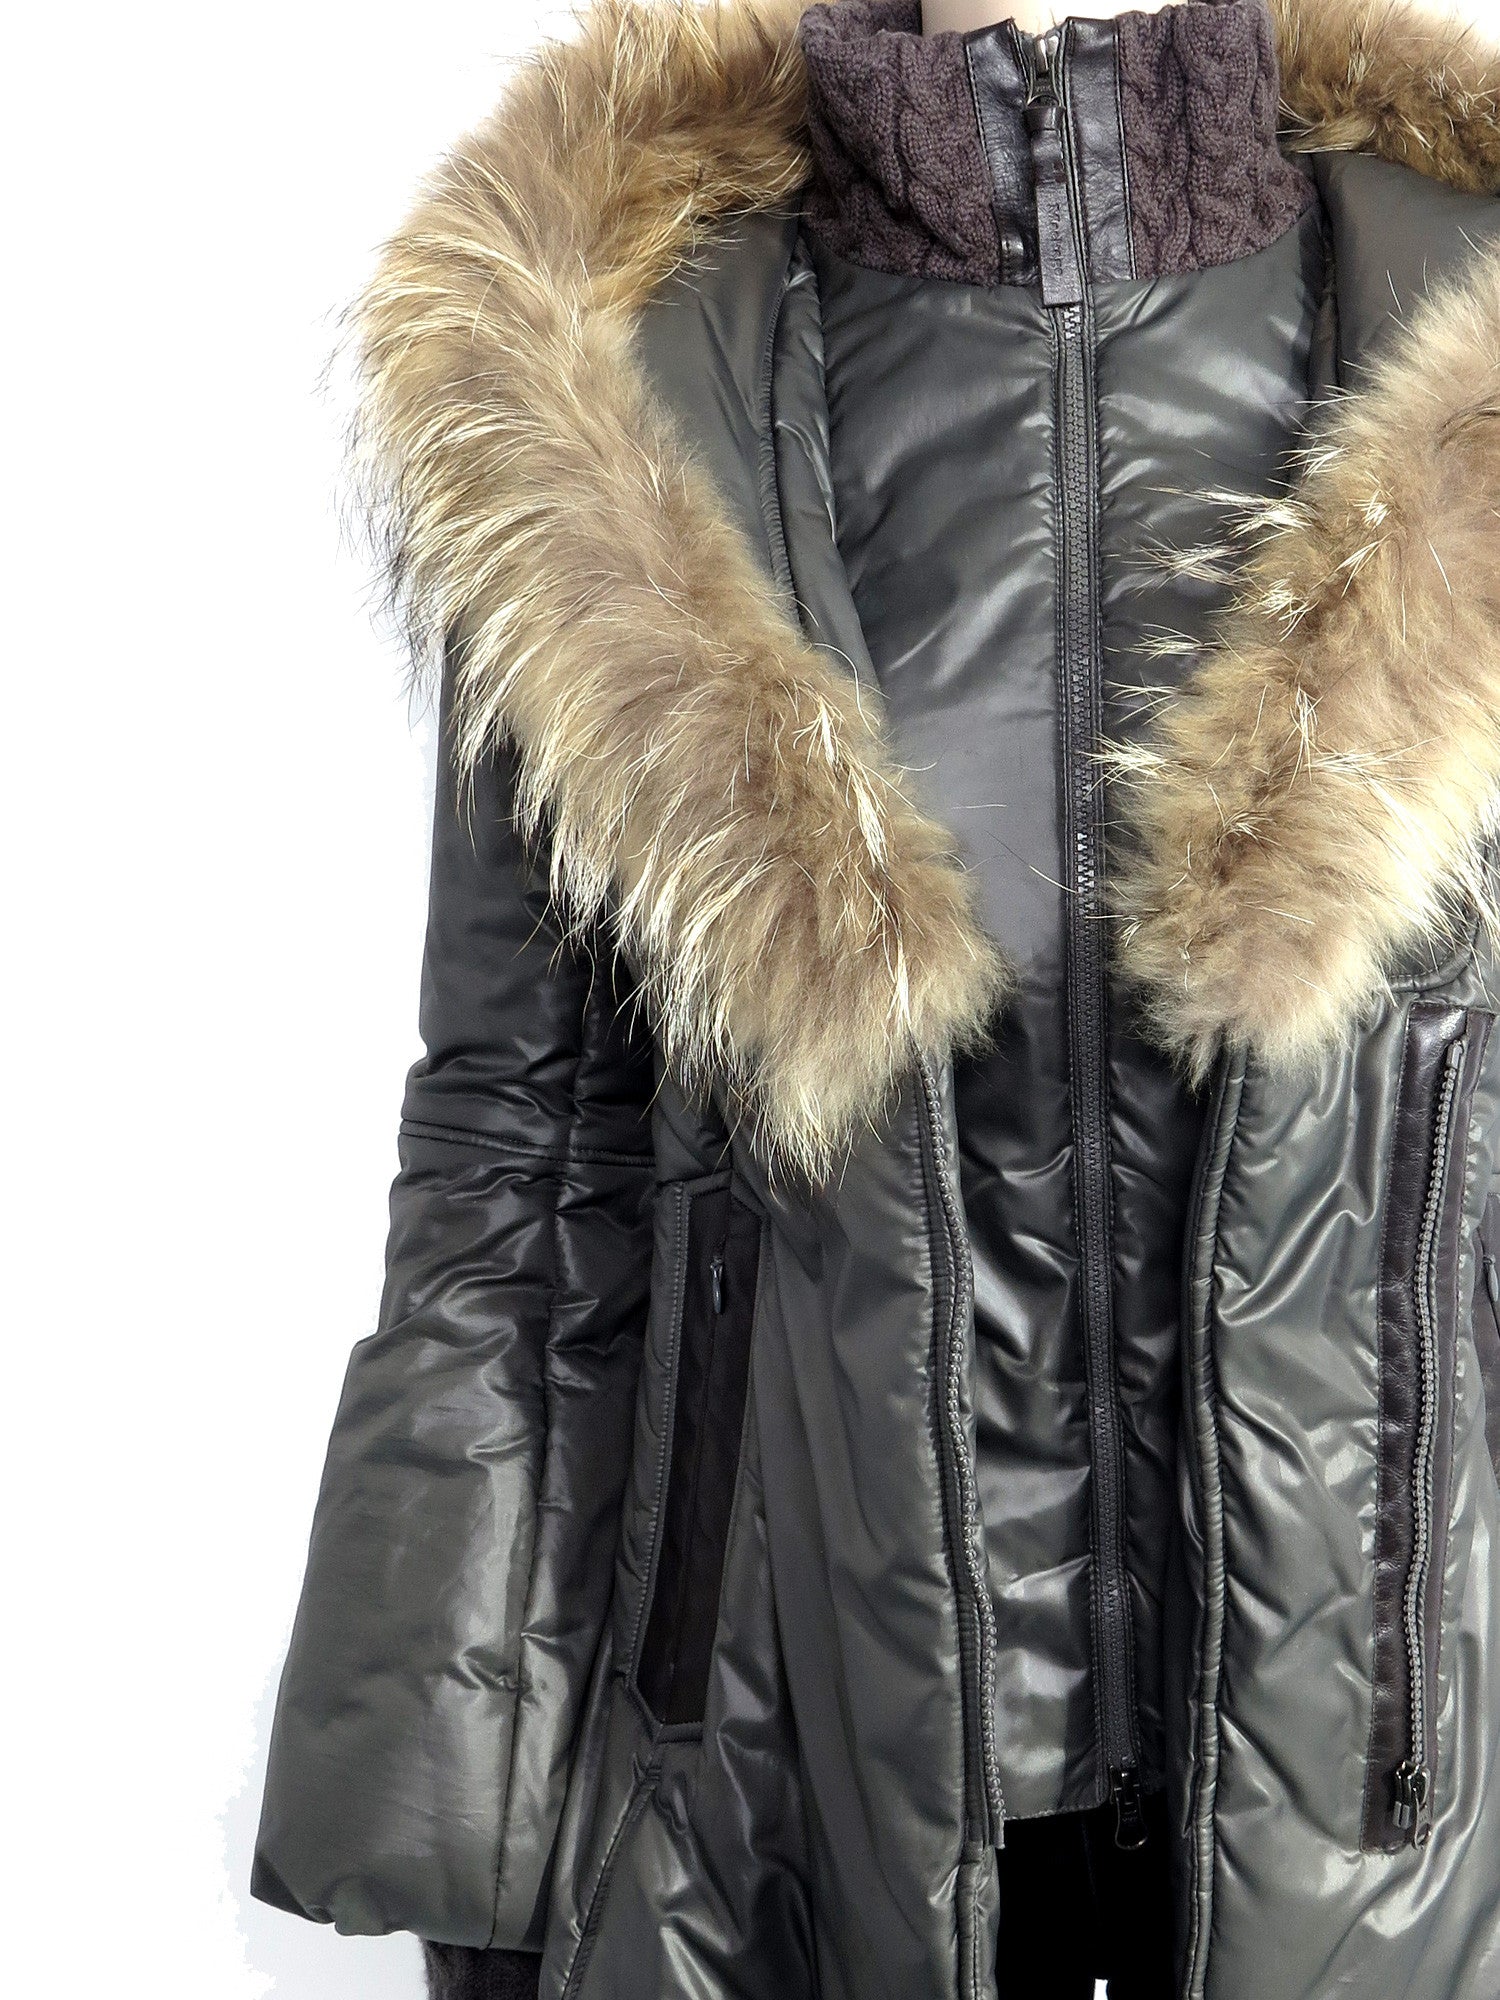 Pre-owned Mackage Winter Down Coat with Fur Hood – Sabrina's Closet